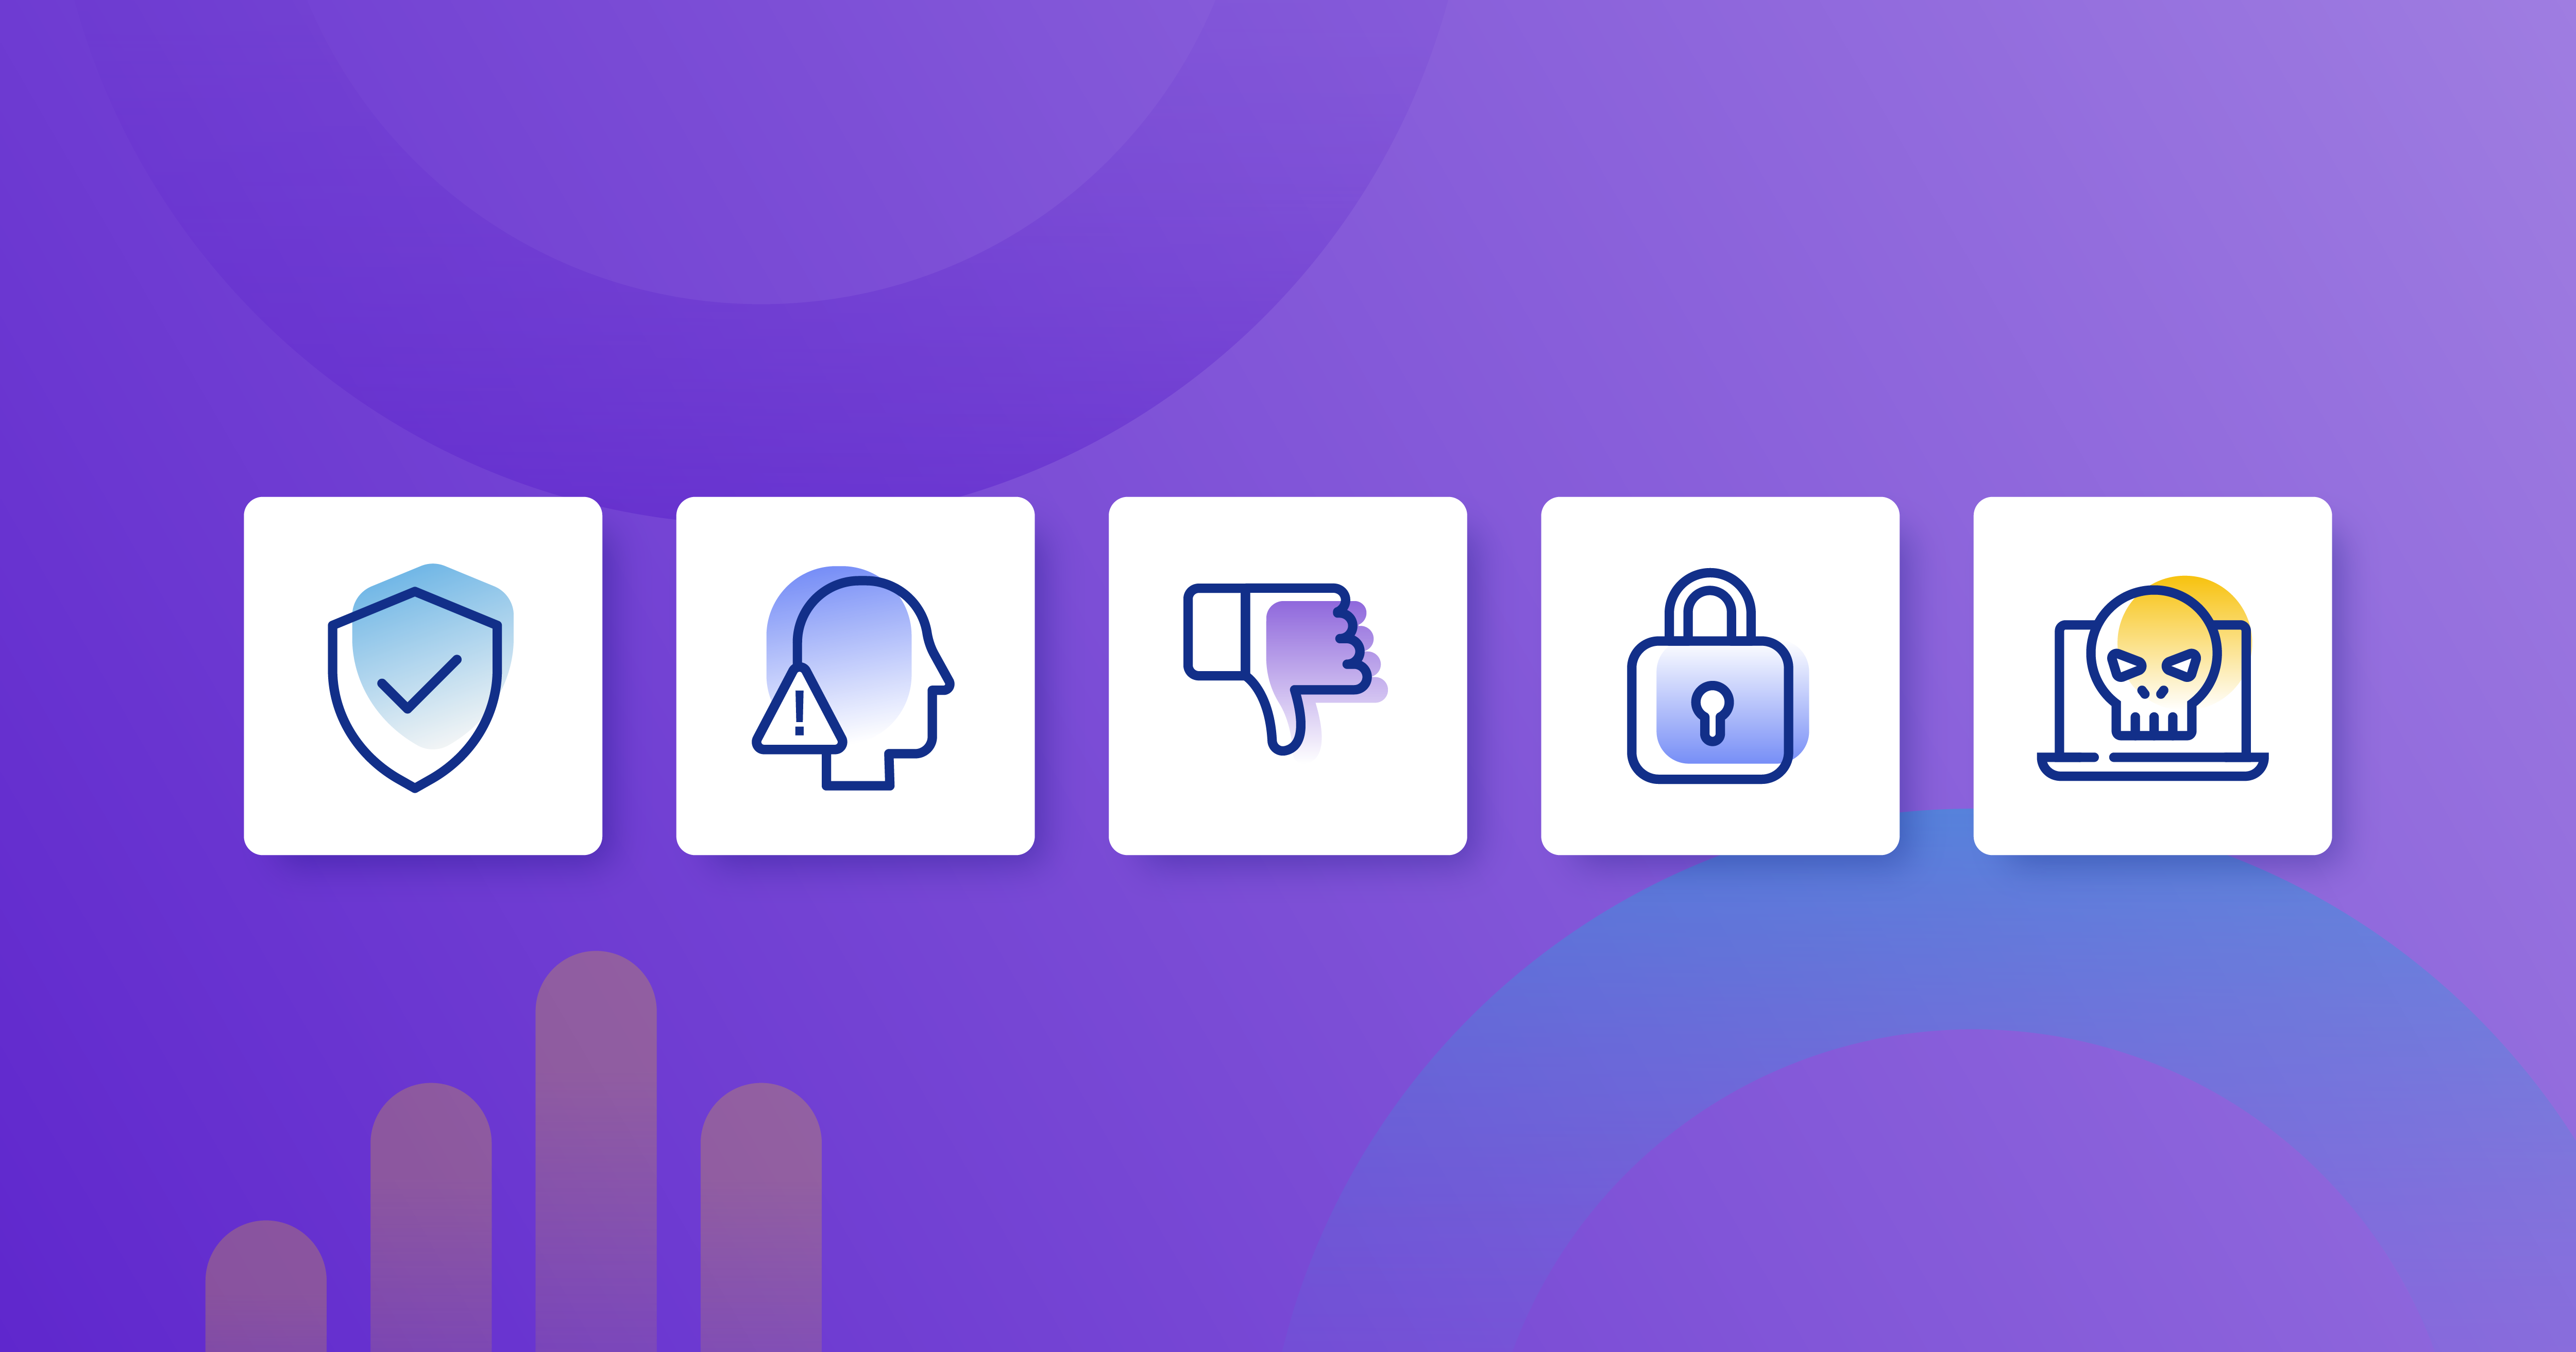 Security threats to your ecommerce website are varied. Image shows a graphic representation of different threats on a purple background.